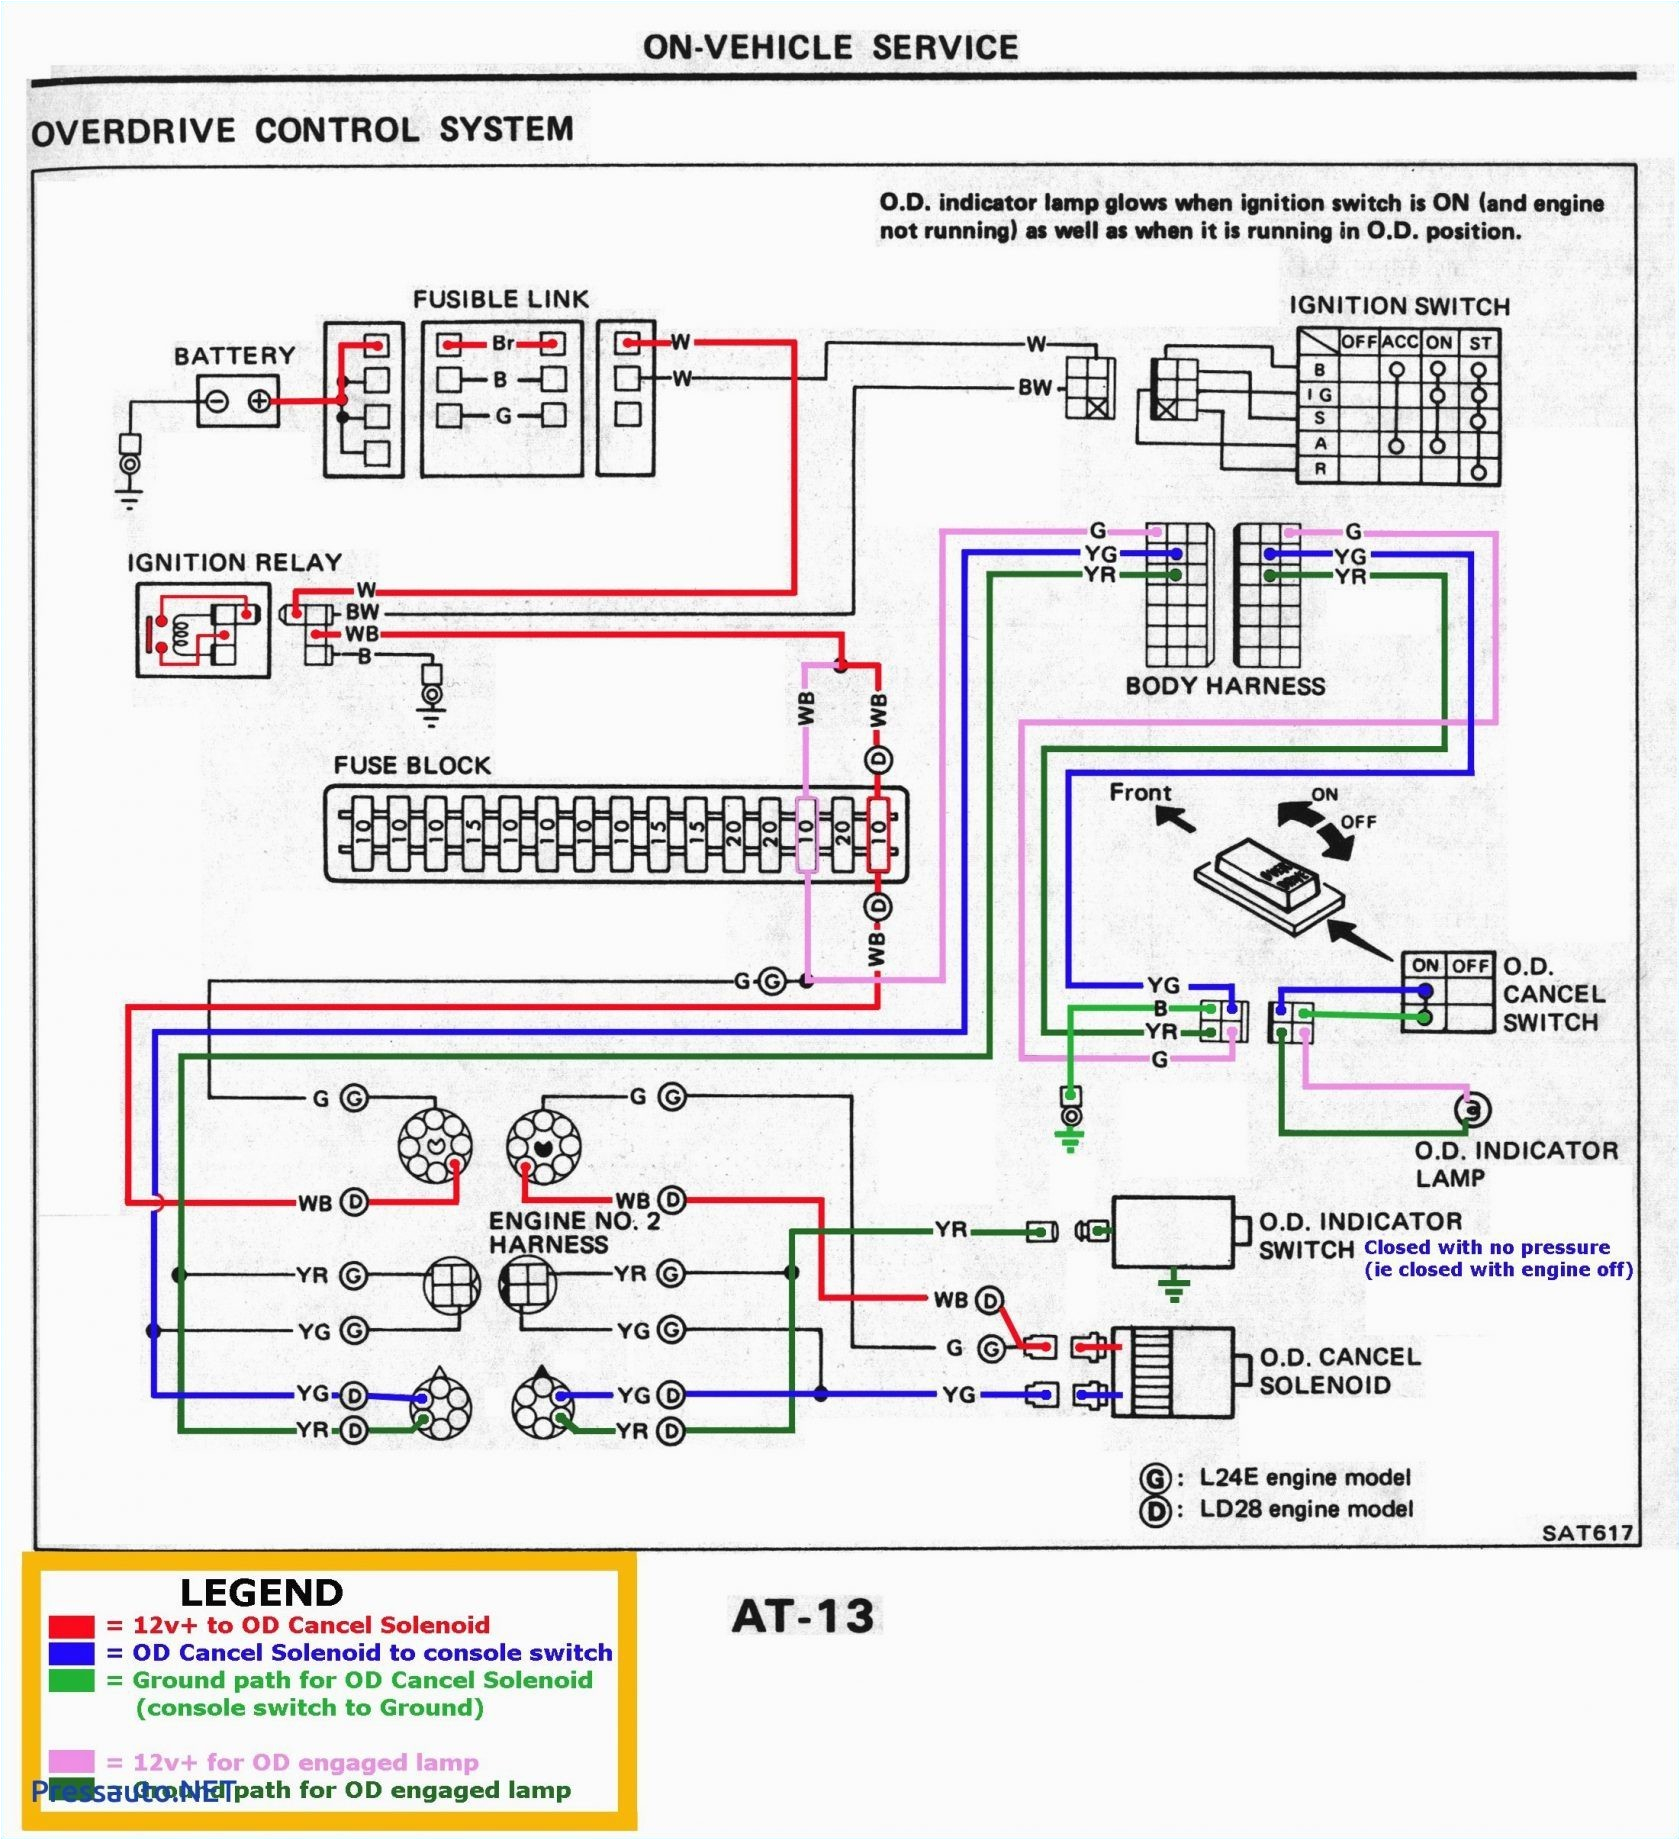 1993 toyota corolla fuse cover diagram wiring diagram centre 2013 camry wiring diagram 2013 camry wiring diagram